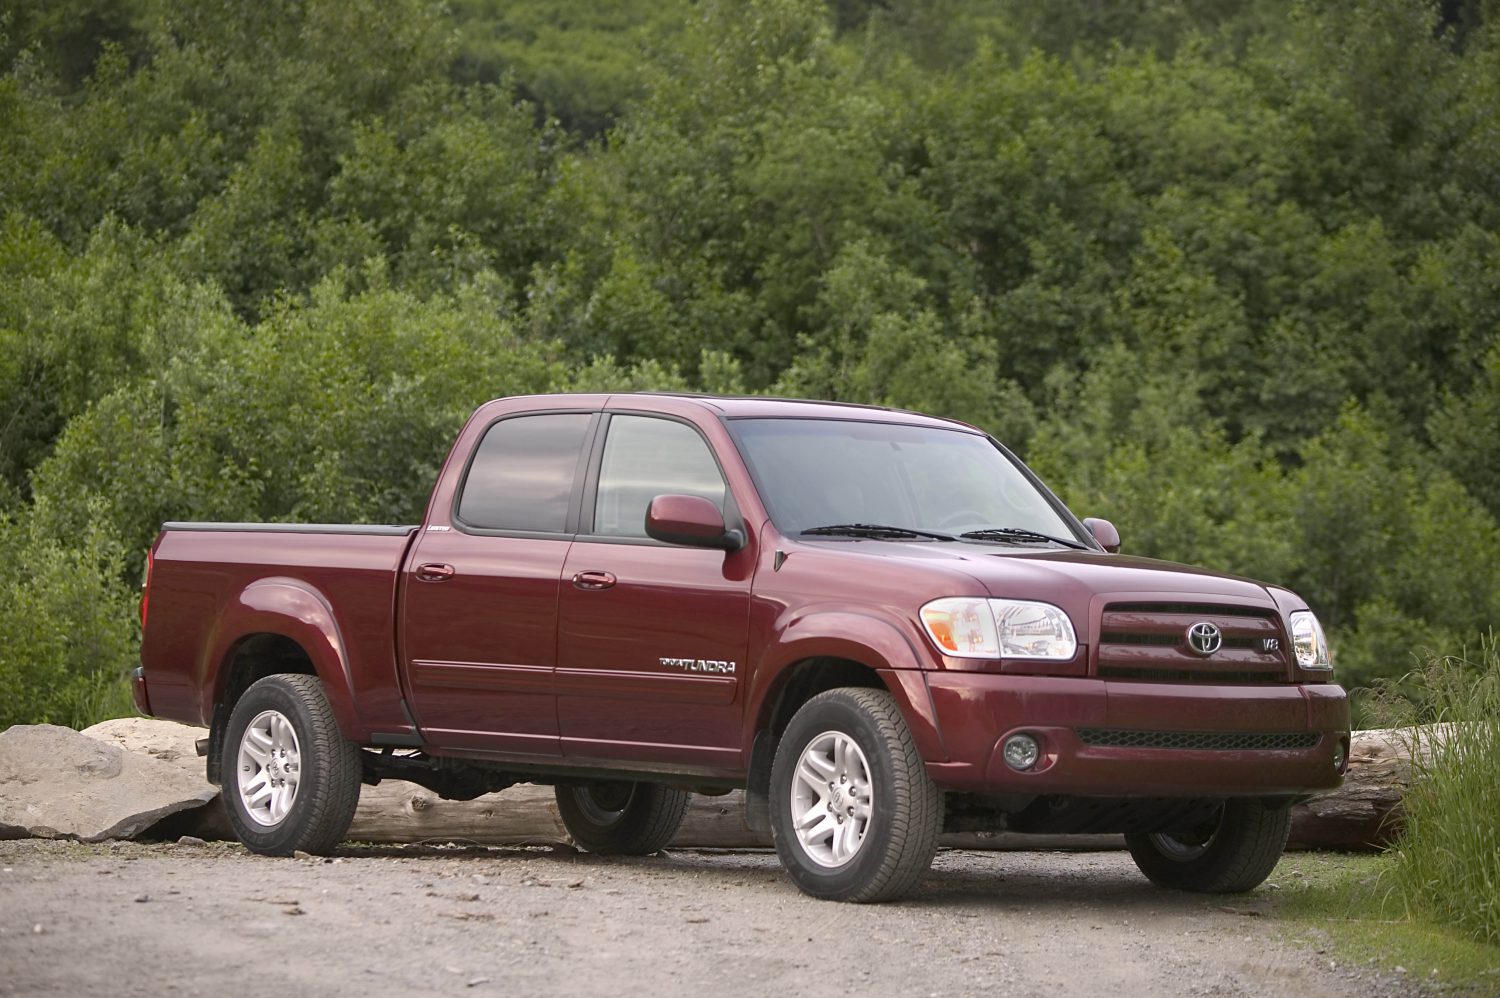 A maroon 2006 Toyota Tundra with a four-door cab parked on a dirt parking lot with green trees in the background.